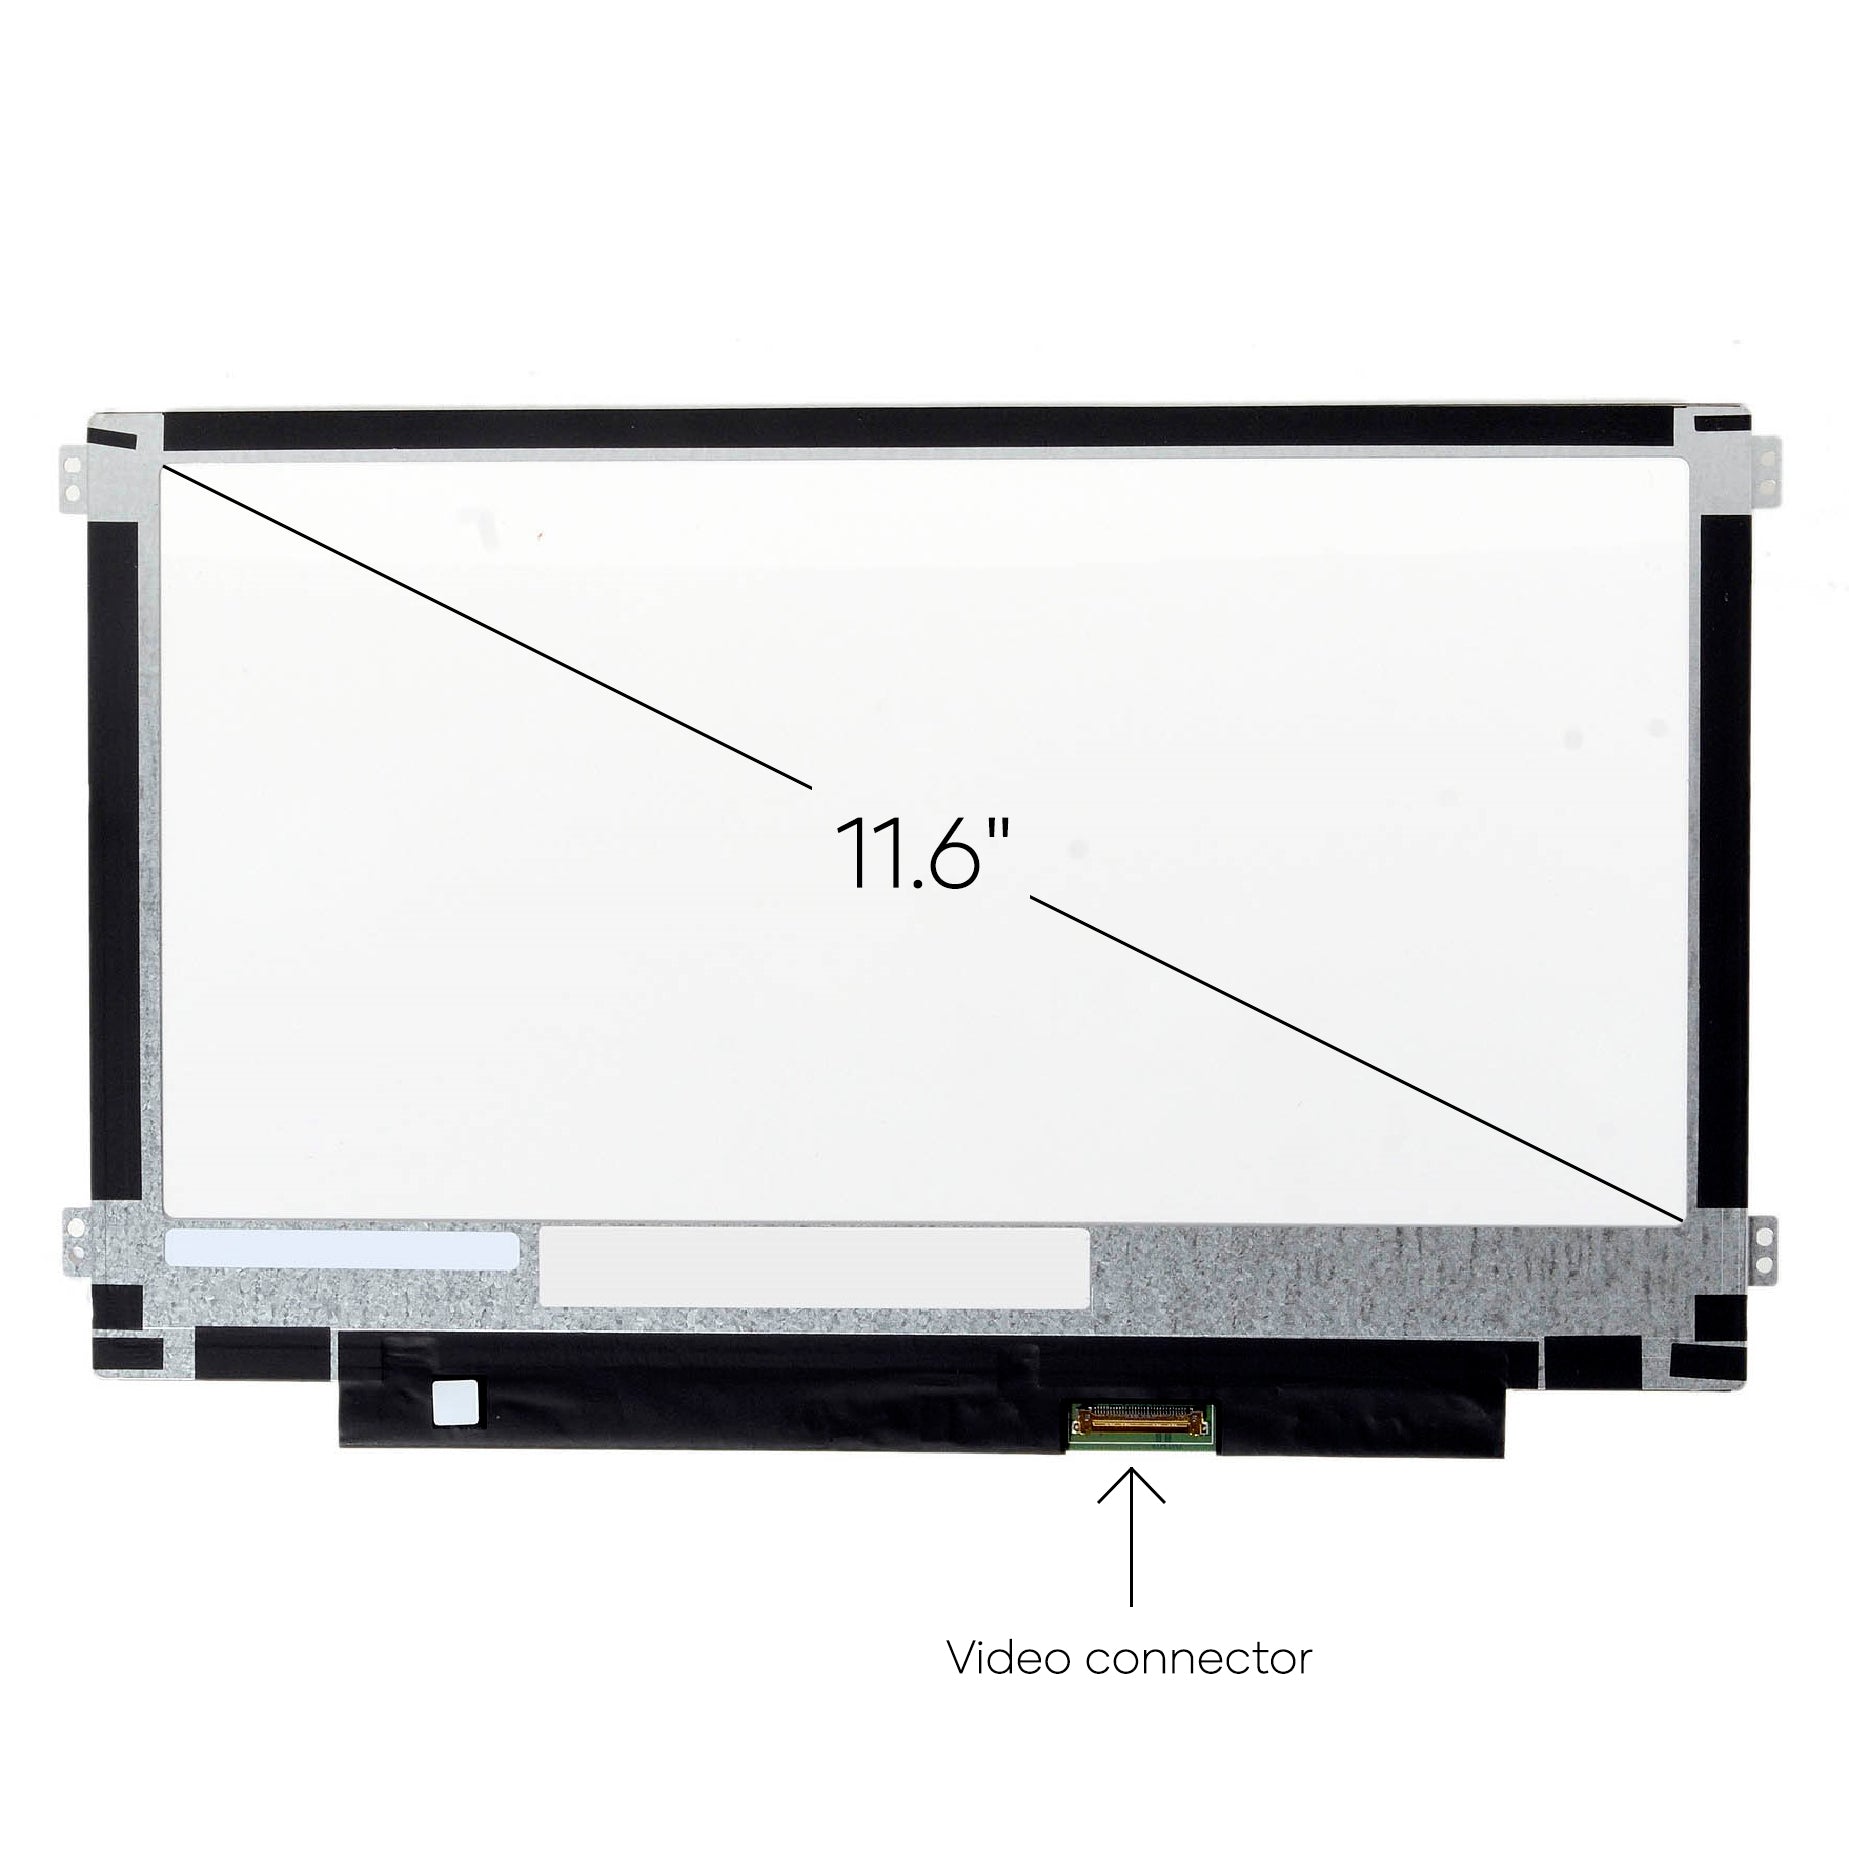 Screen Replacement for Lenovo Thinkpad 11E 20HV HD 1366x768 Matte LCD LED Display